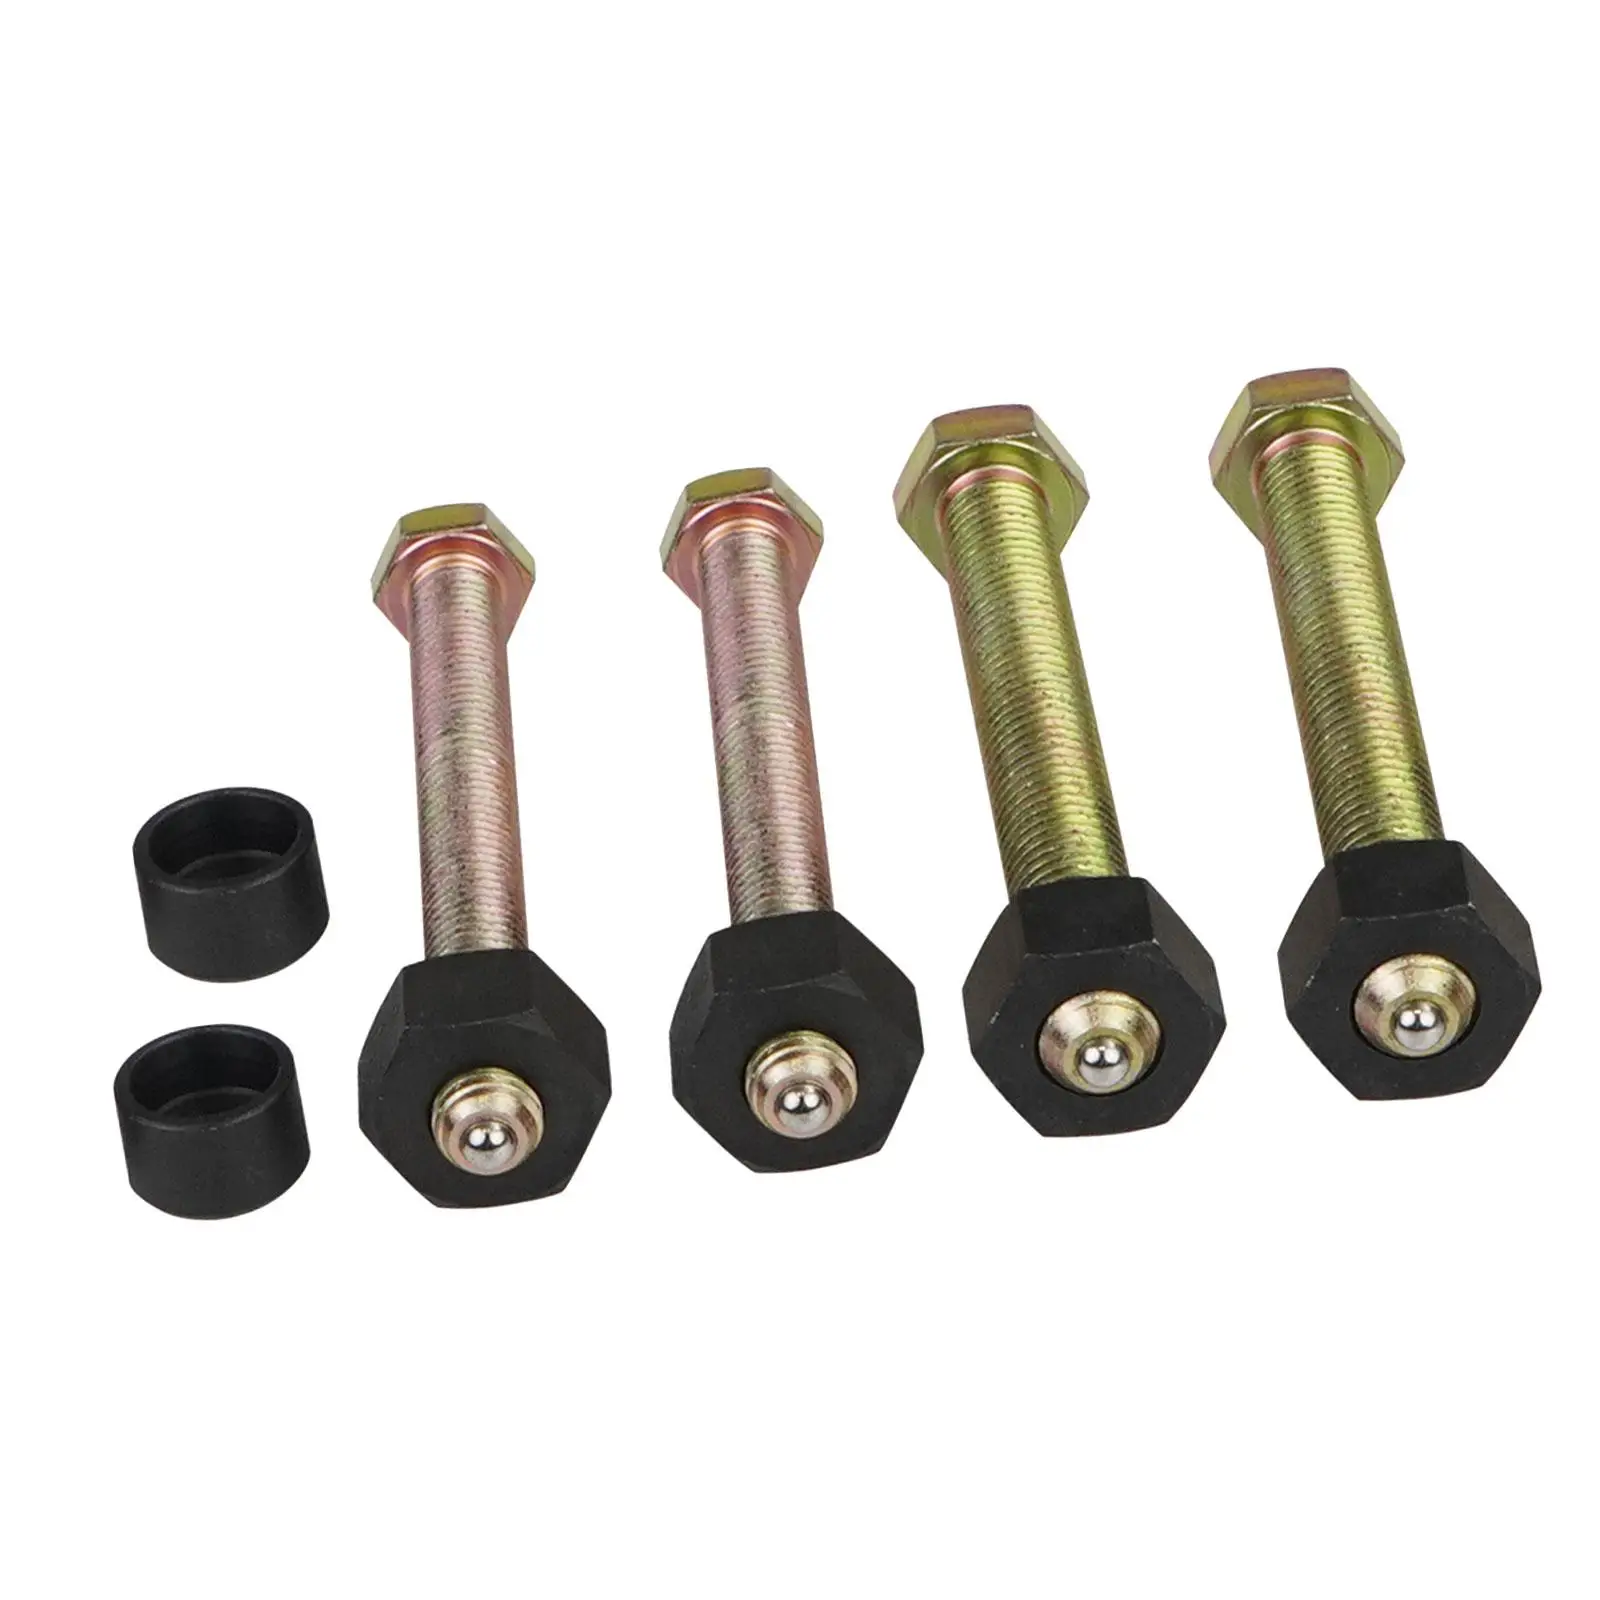 Impact Rated Hub Removal Bolt Set 78834 Replaces Professional Spare Parts Repair Parts Accessories M12 M14 Nut Pneumatic Tools